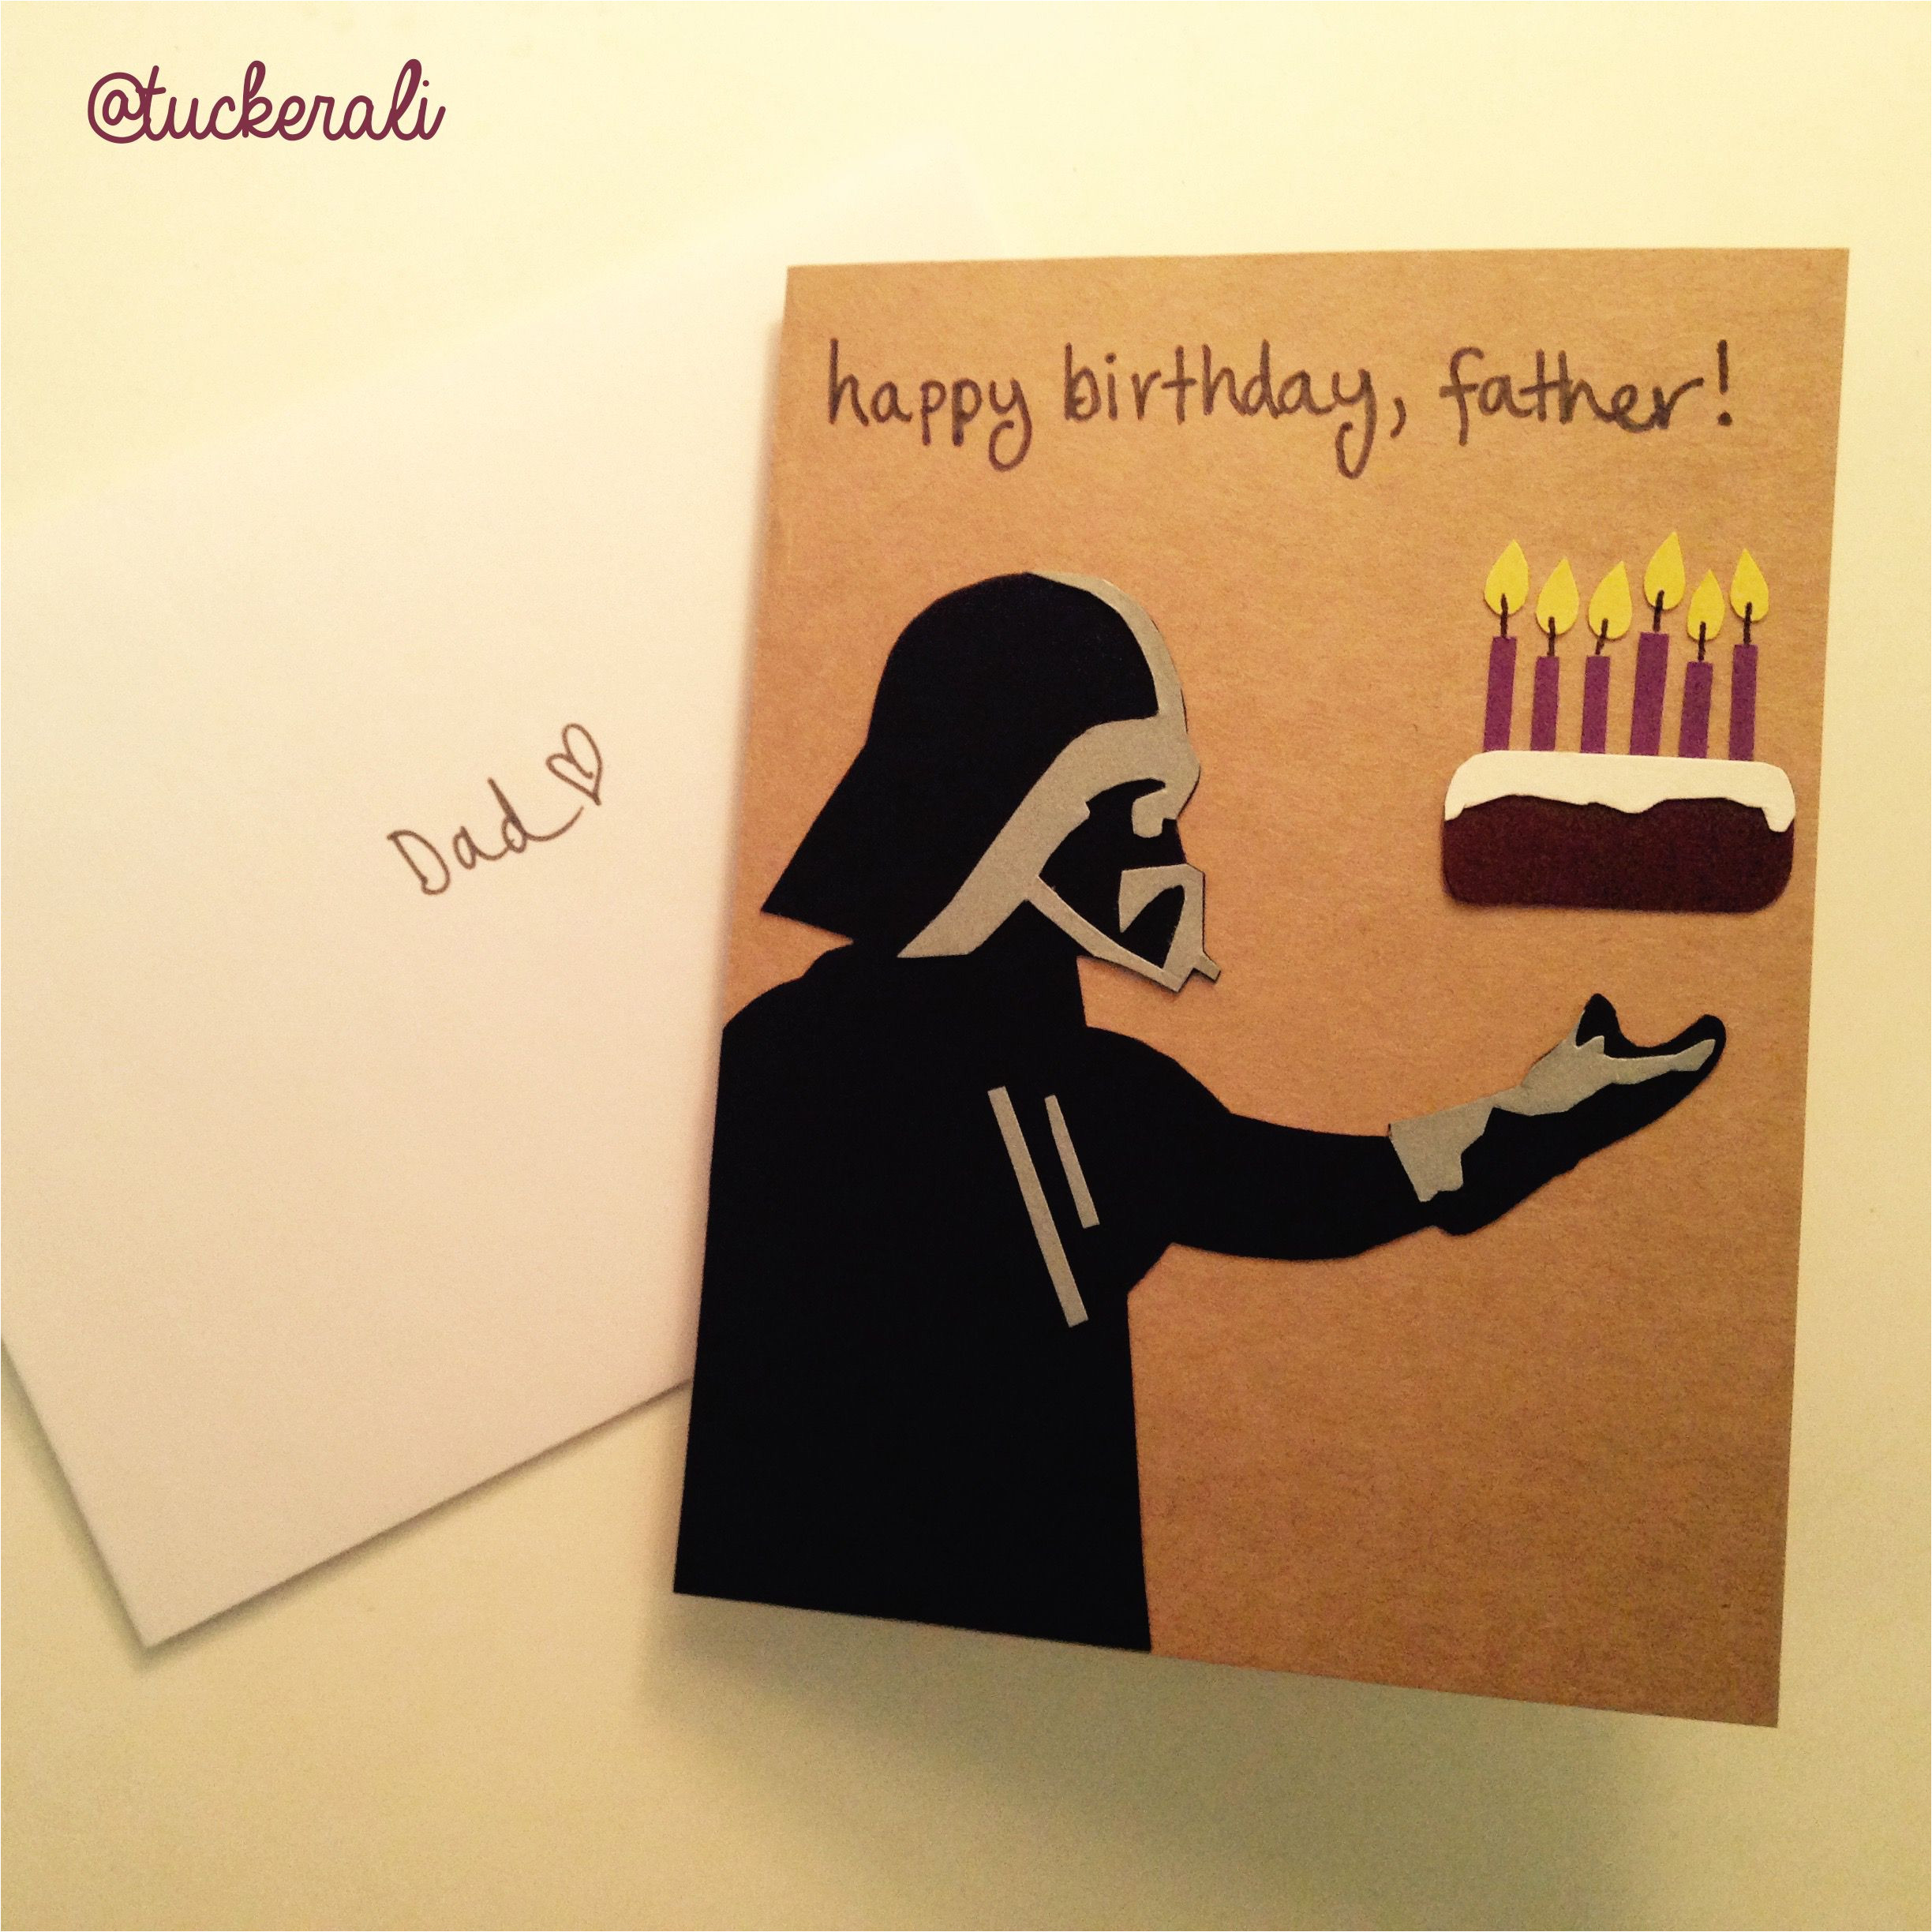 Star Wars Happy Birthday Card today In Ali Does Crafts Darth Vader Birthday Card for